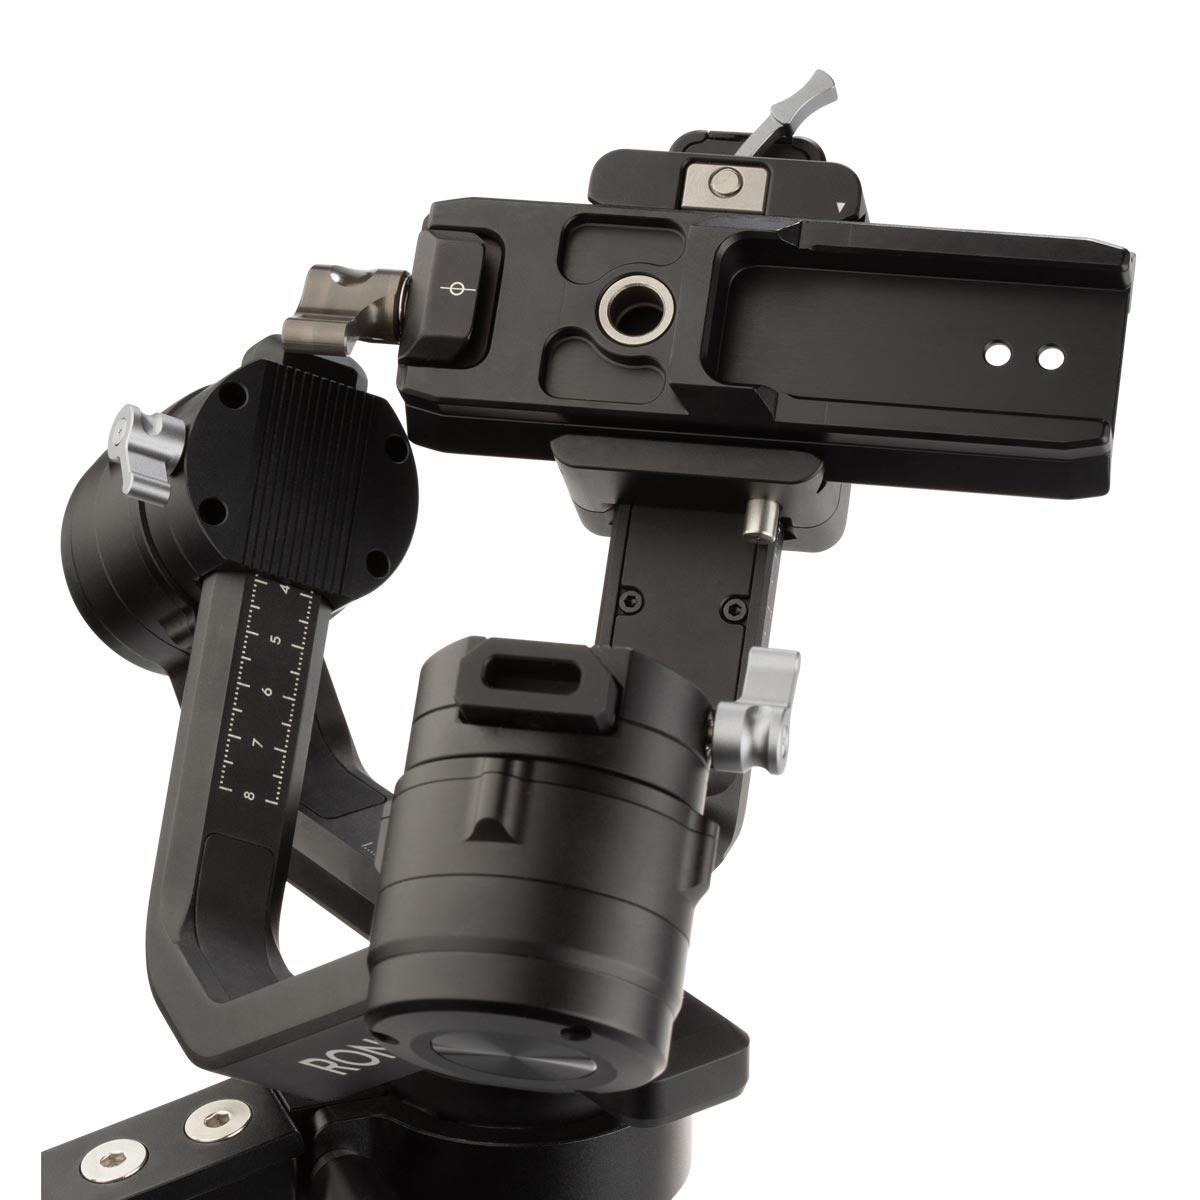 PRS002 Video Plate Replacement for DJI Ronin S with Built-In